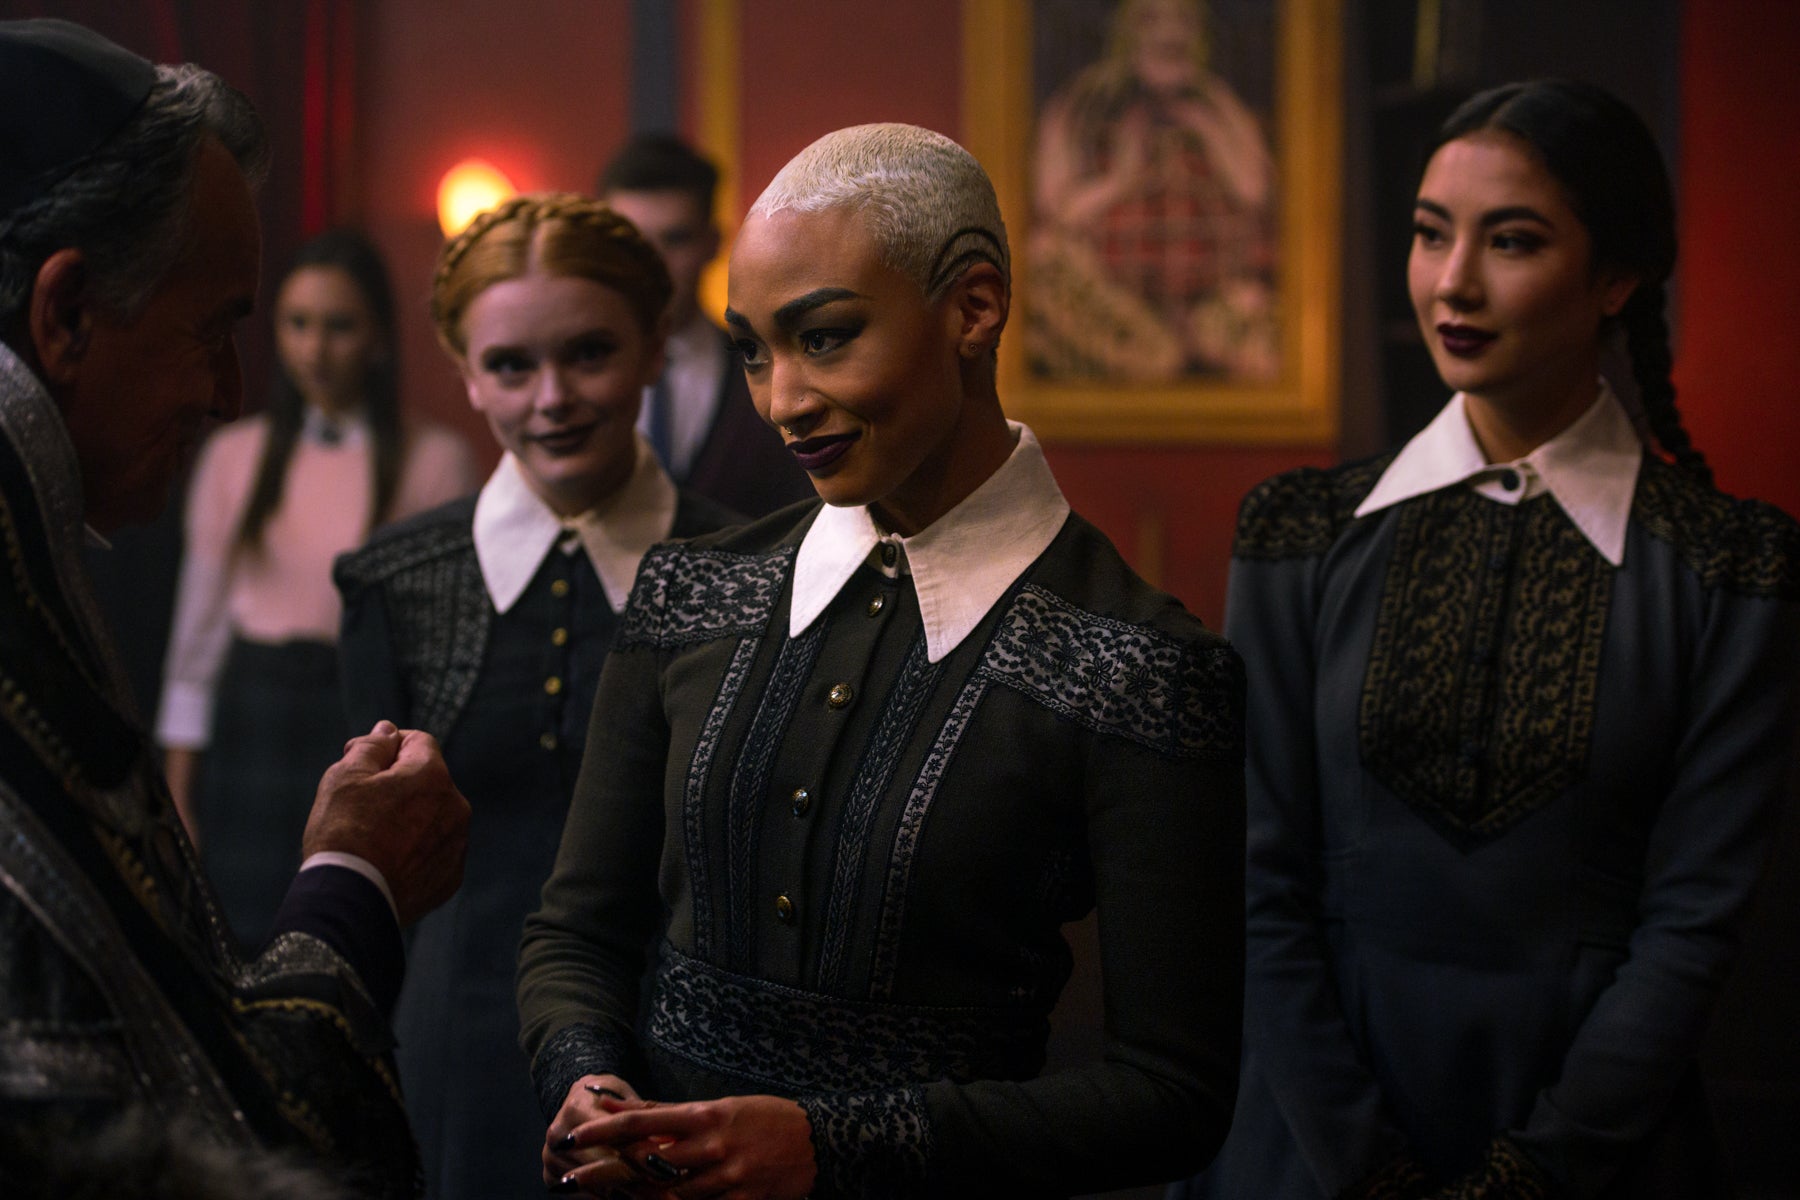 The Weird Sisters stand in a row with Prudence in the foreground, addressing a man off camera in a scene from Chilling Adventures of Sabrina.